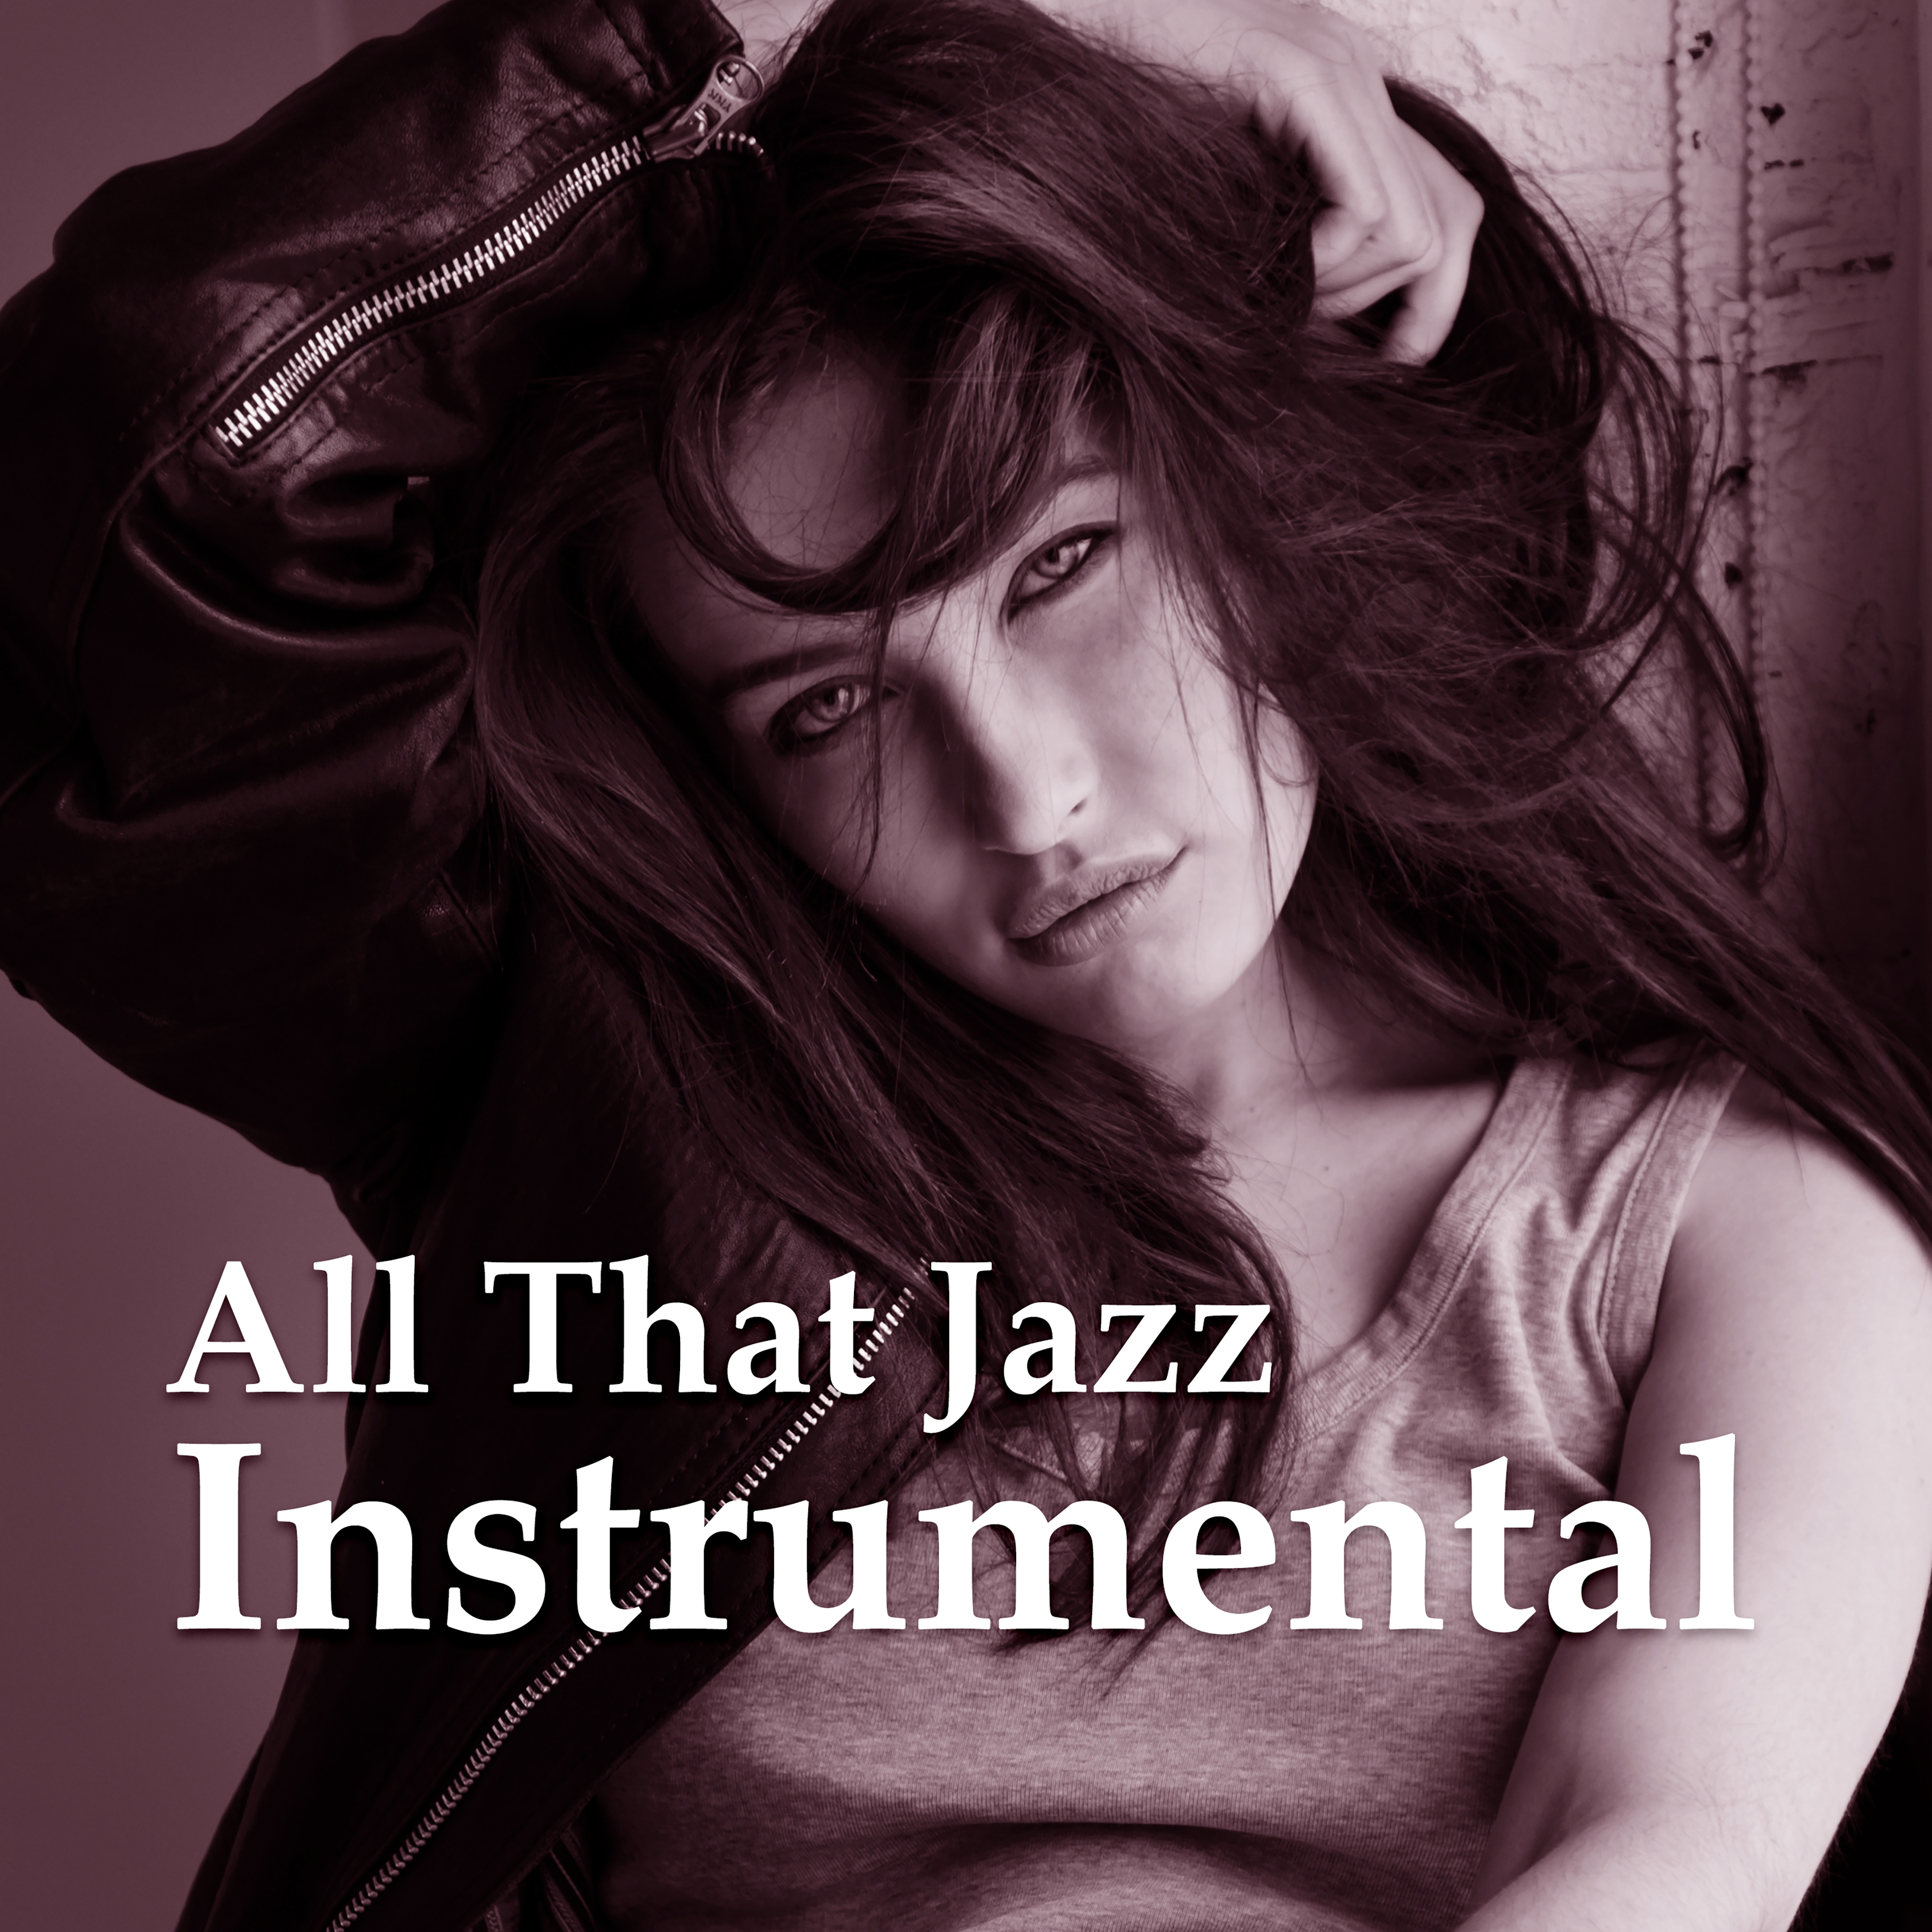 All That Jazz Instrumental  Mellow Piano, Instrumental Songs, Ambient Jazz Lounge, Relaxed Soft Piano